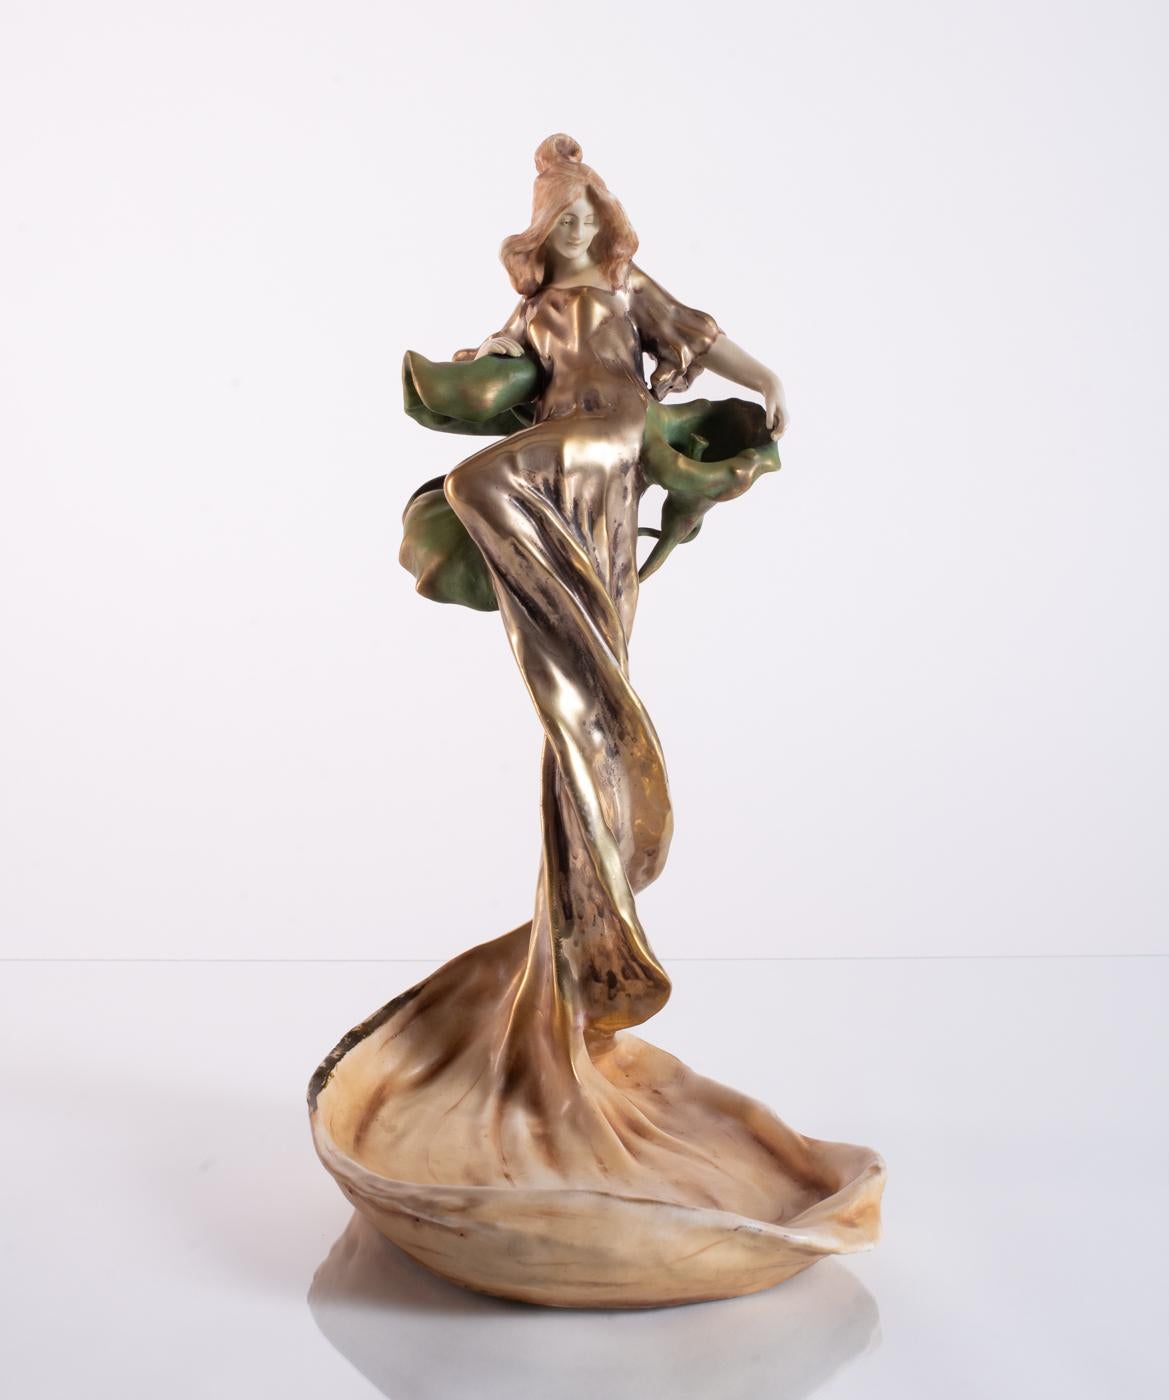 Dramatic Amphora Ceramic with Art Nouveau Maiden in Lily Bouquet c. 1900